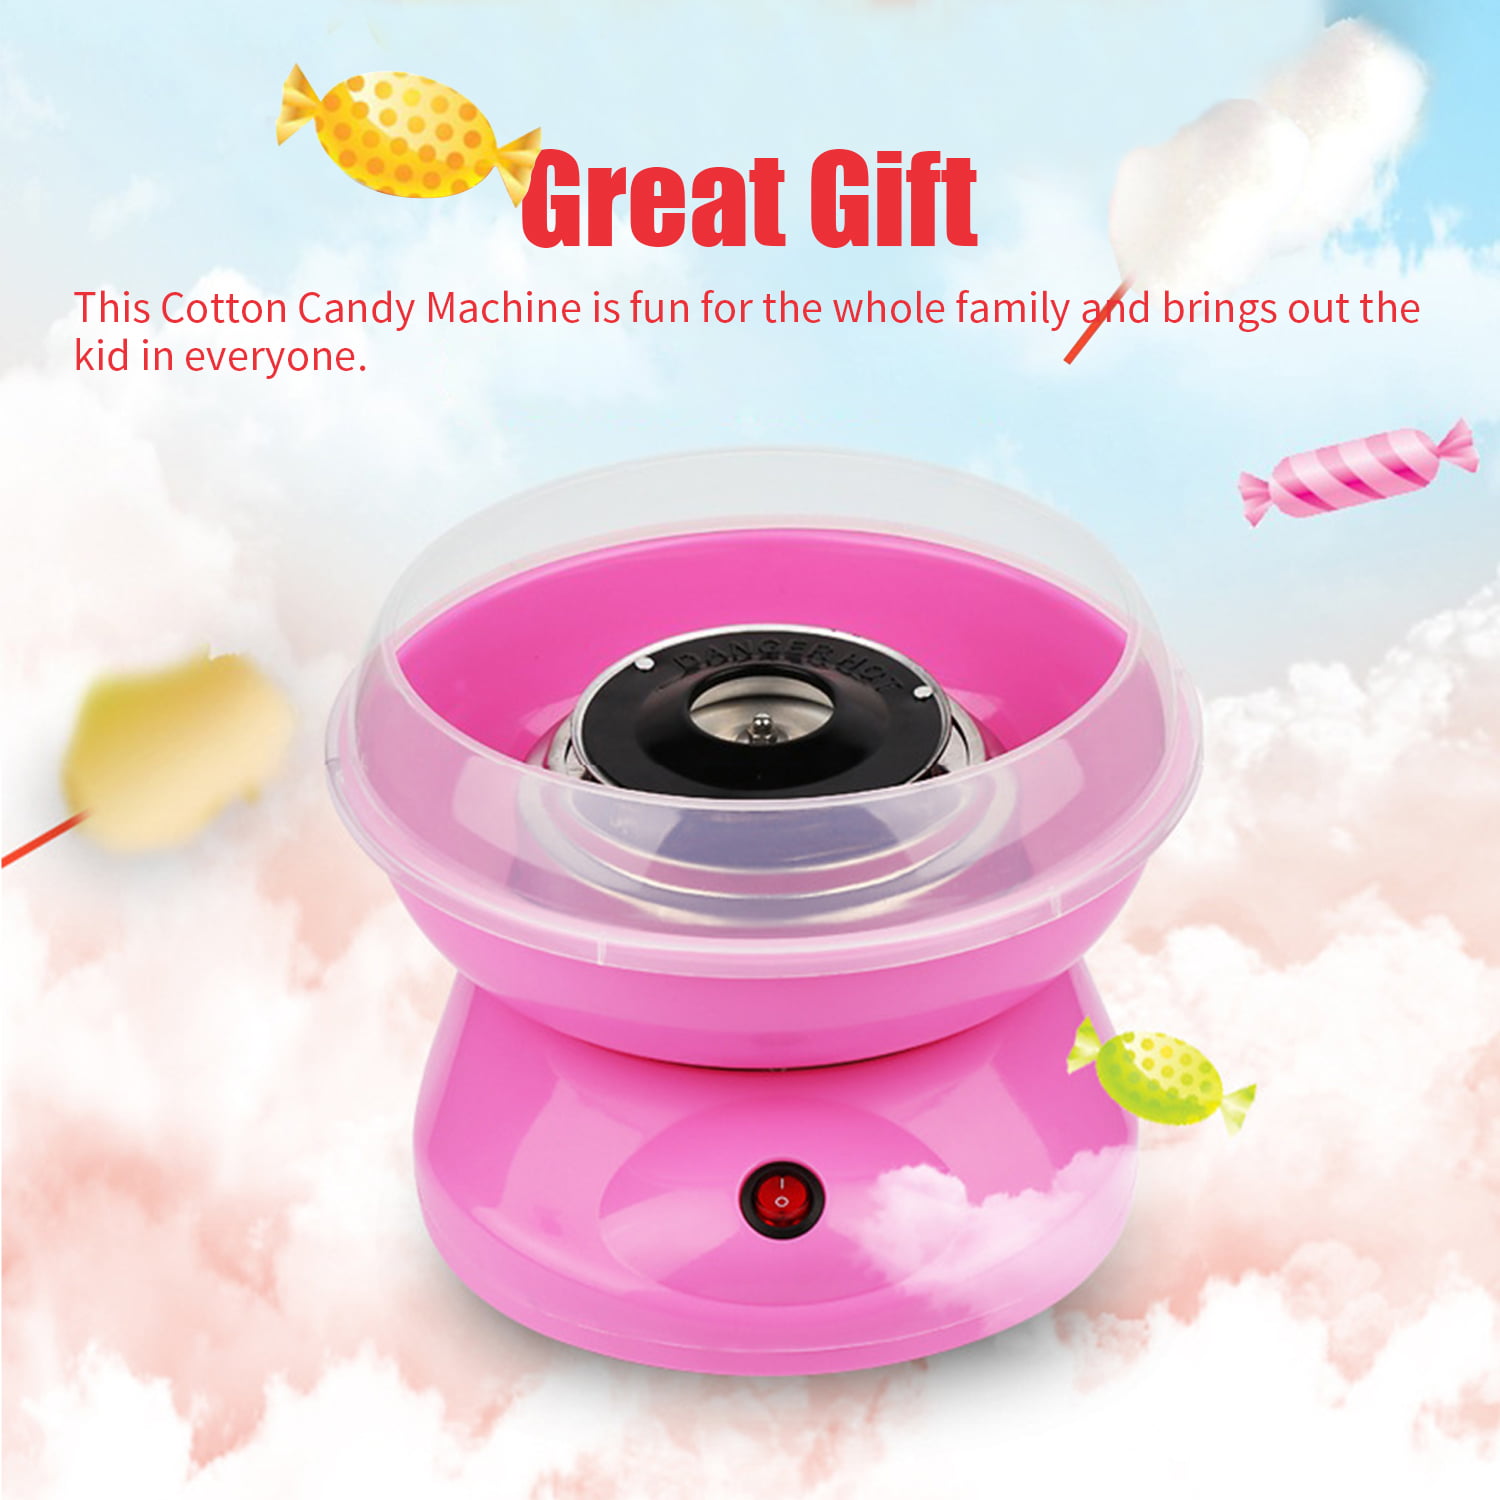 Feileng Cotton Candy Machine for Kids Birthday Party Easy to Clean and Use Candy Floss Maker Retro Mini Electric Cotton Candy Machine for Sugar or Hard Candy 